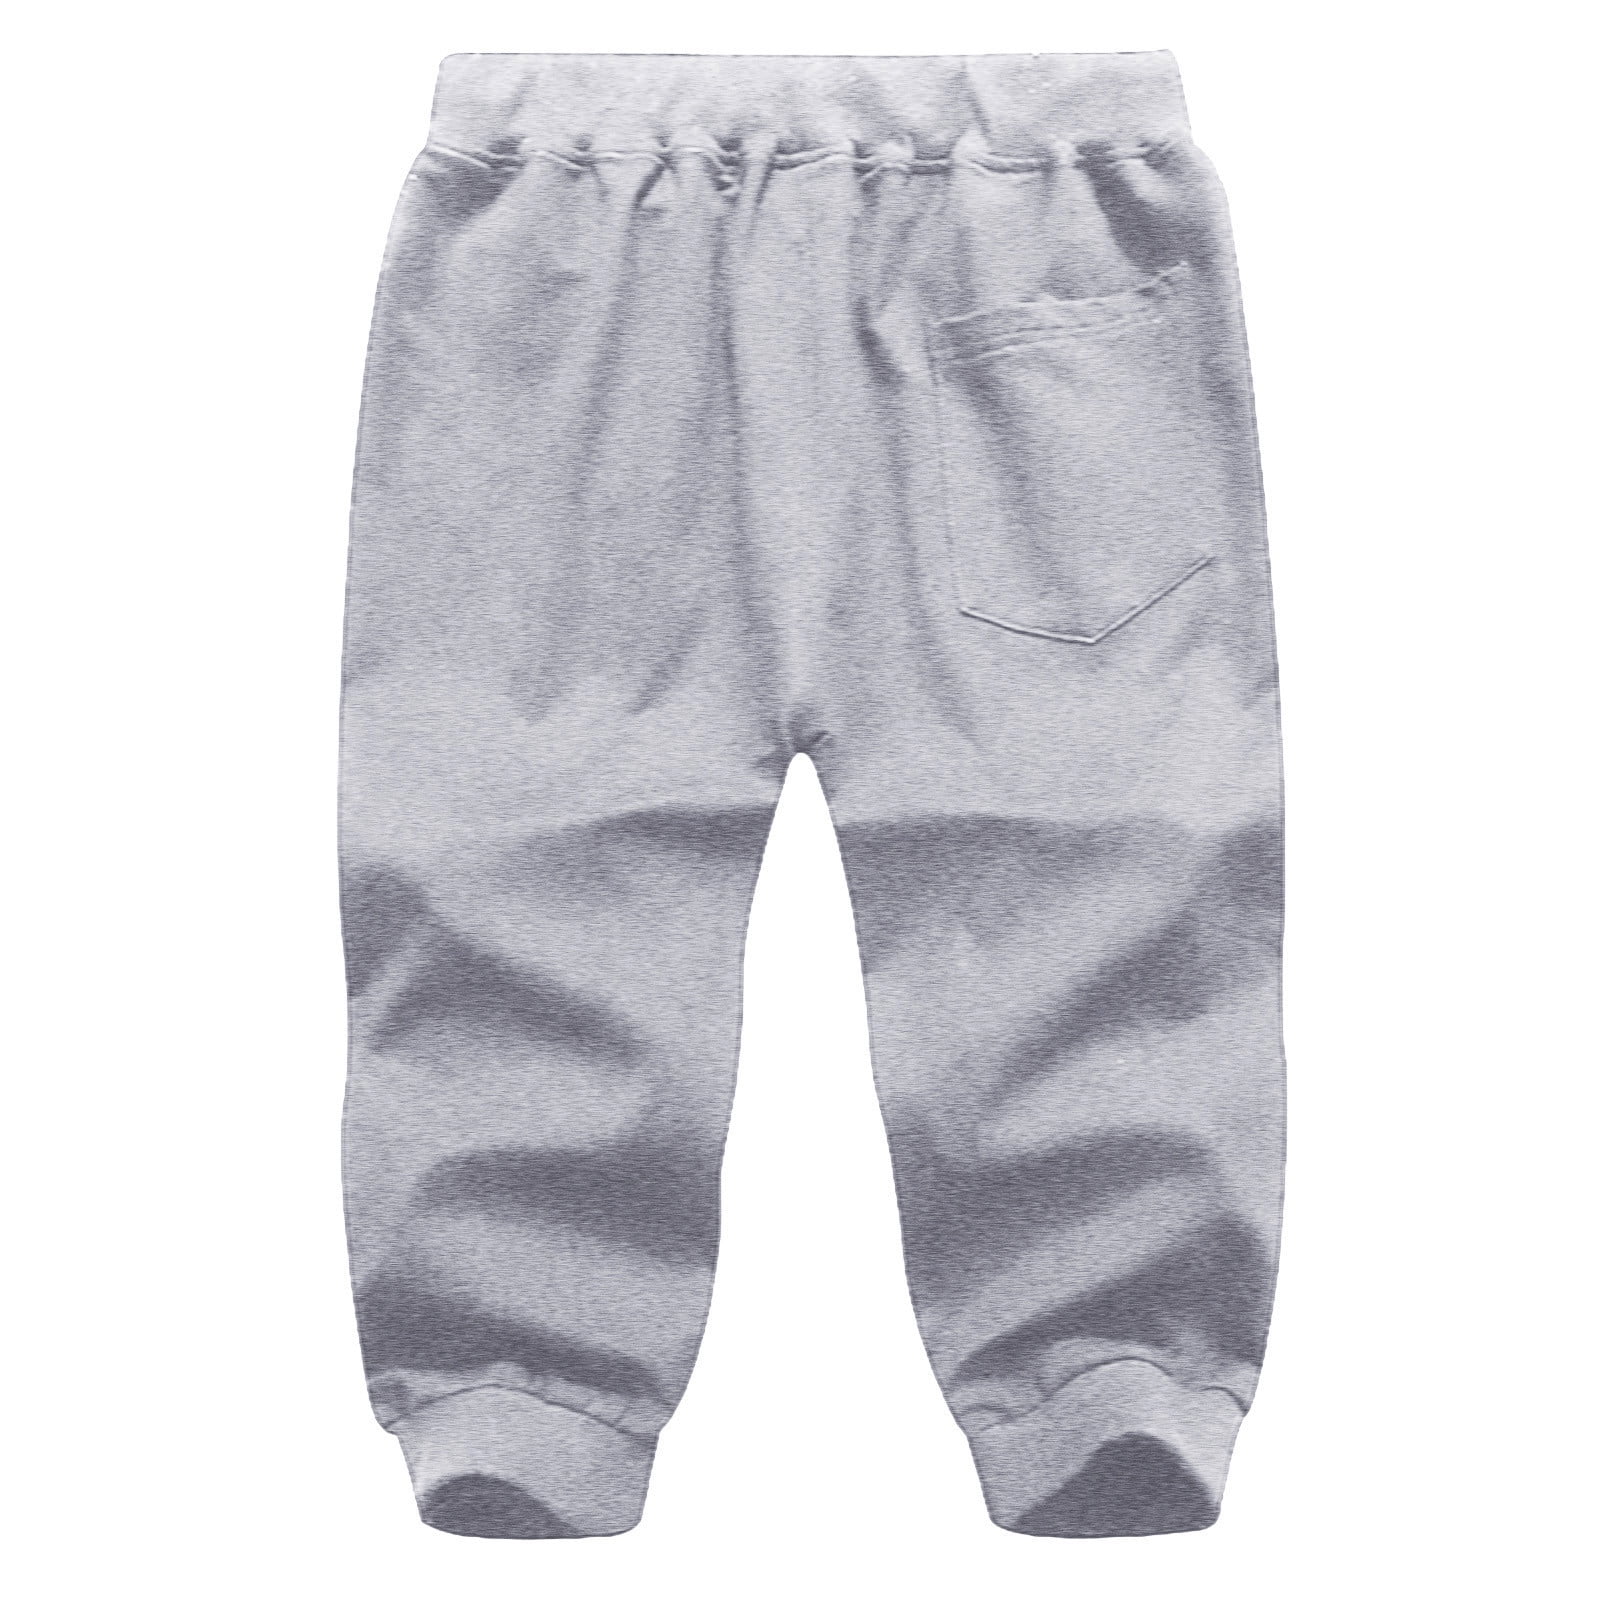 symoid Mens Athletic Sweatpants- Casual Trousers and Trousers Plus